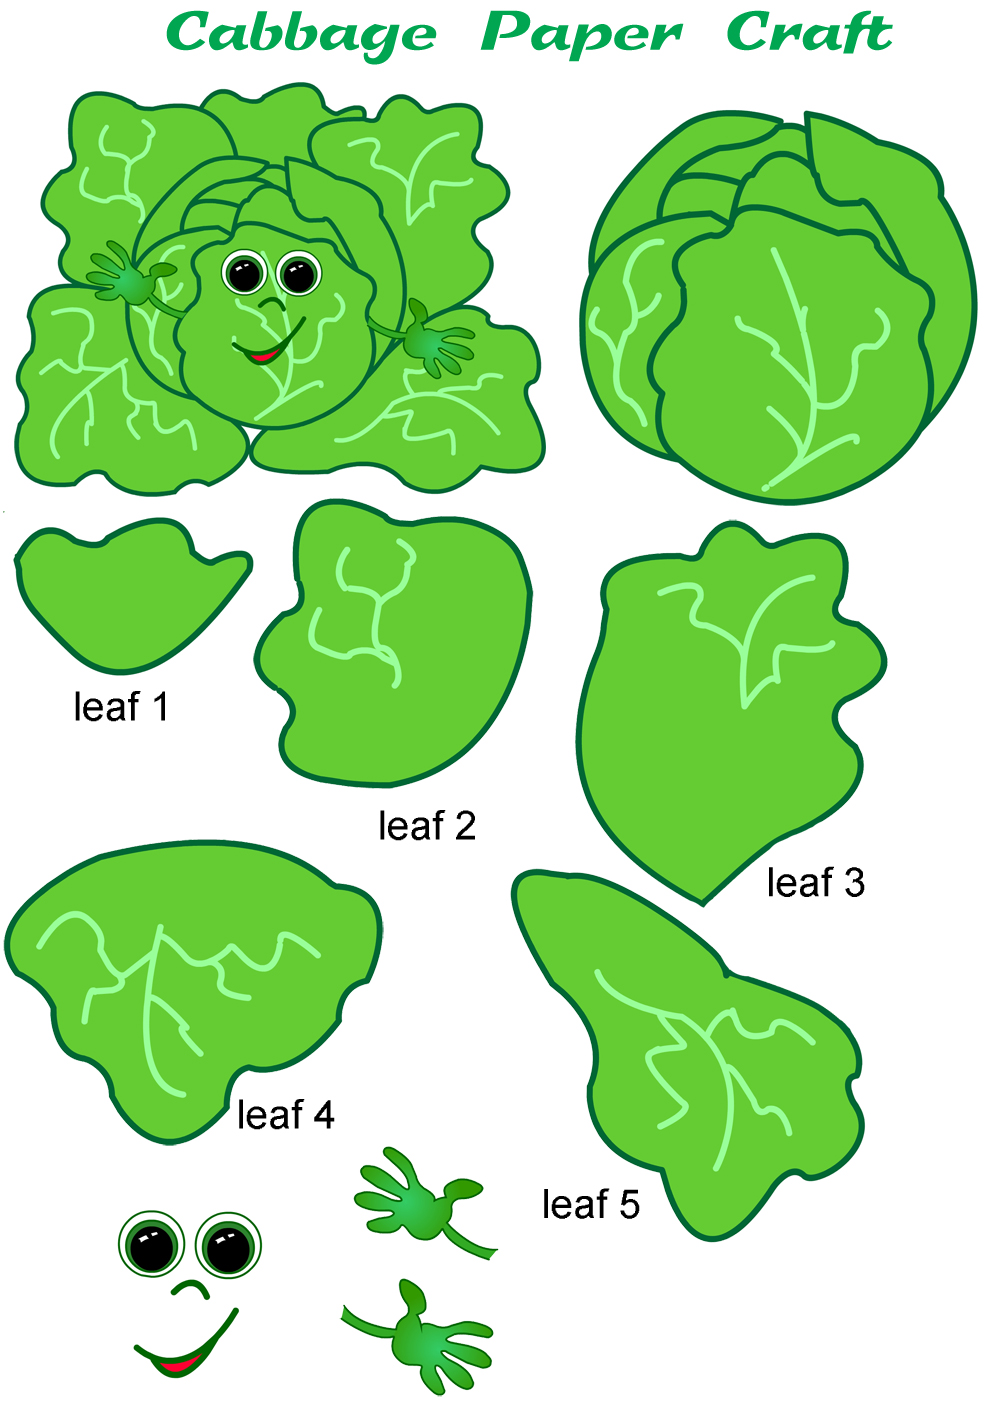 Cabbage Paper Craft Template